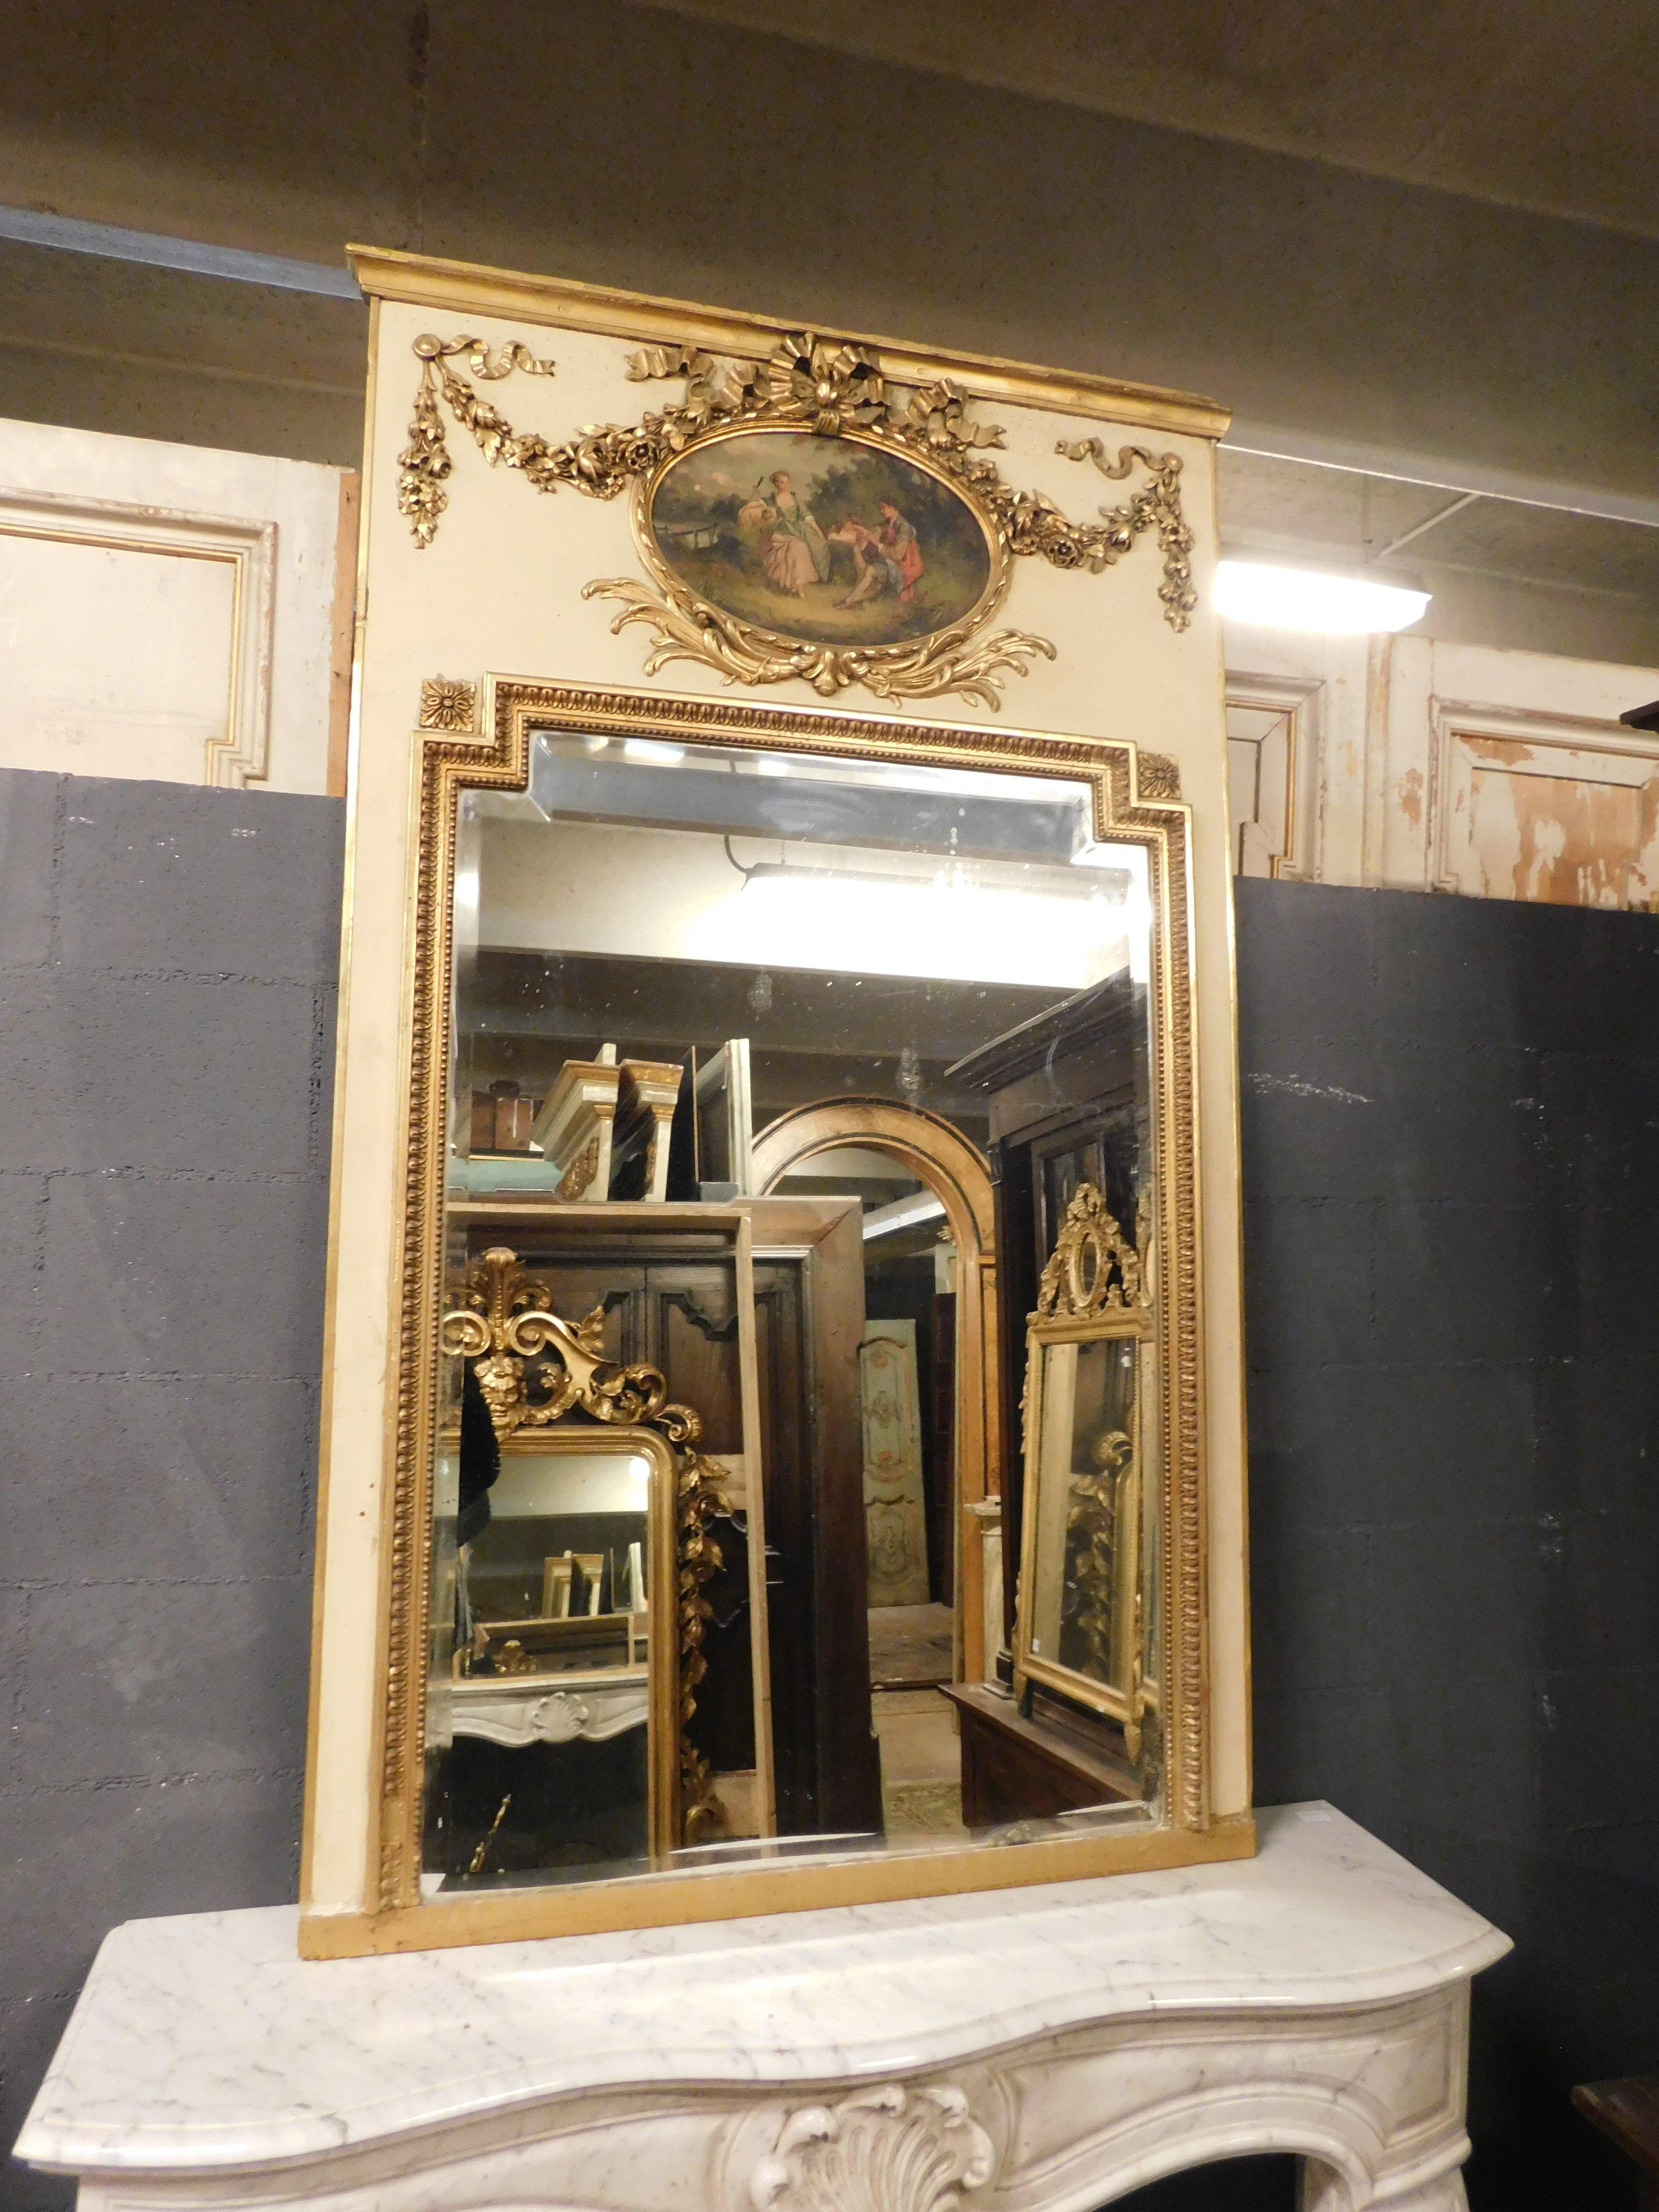 Antique gilded and hand-lacquered mirror, with painting depicting a scene in nature in the countryside, decorated with sculpted and gilded festoons, impressive original mirror, striking that surrounds the entire mirror. From the 19th century, coming